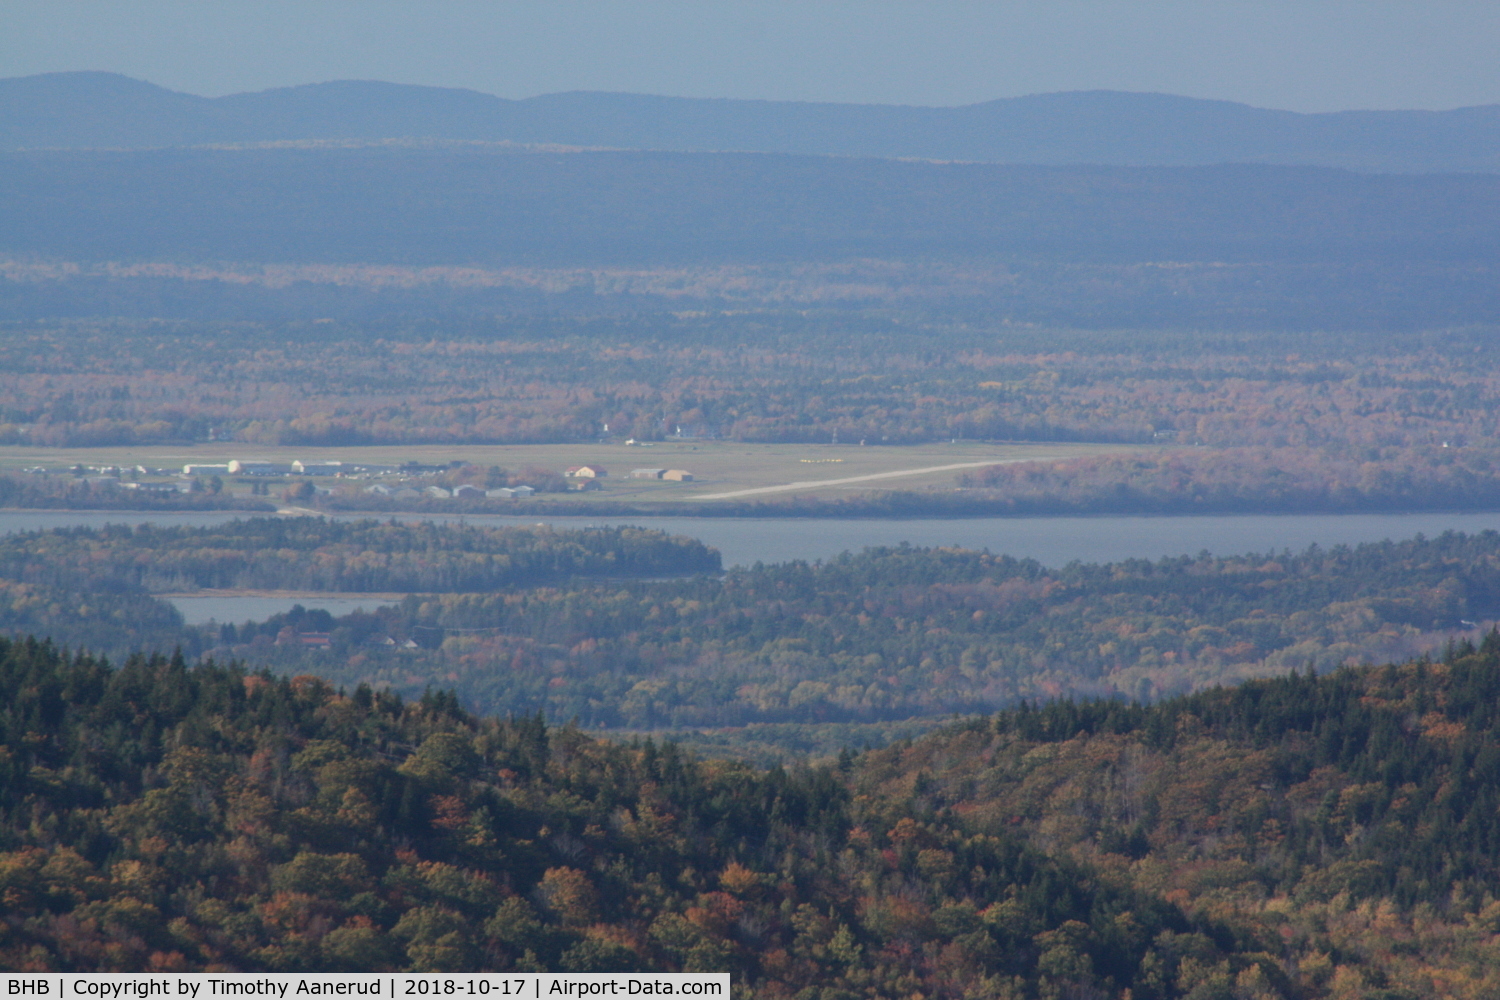 Hancock County-bar Harbor Airport (BHB) - Taken from the top of Cadillac Mountain in Acadia National Park